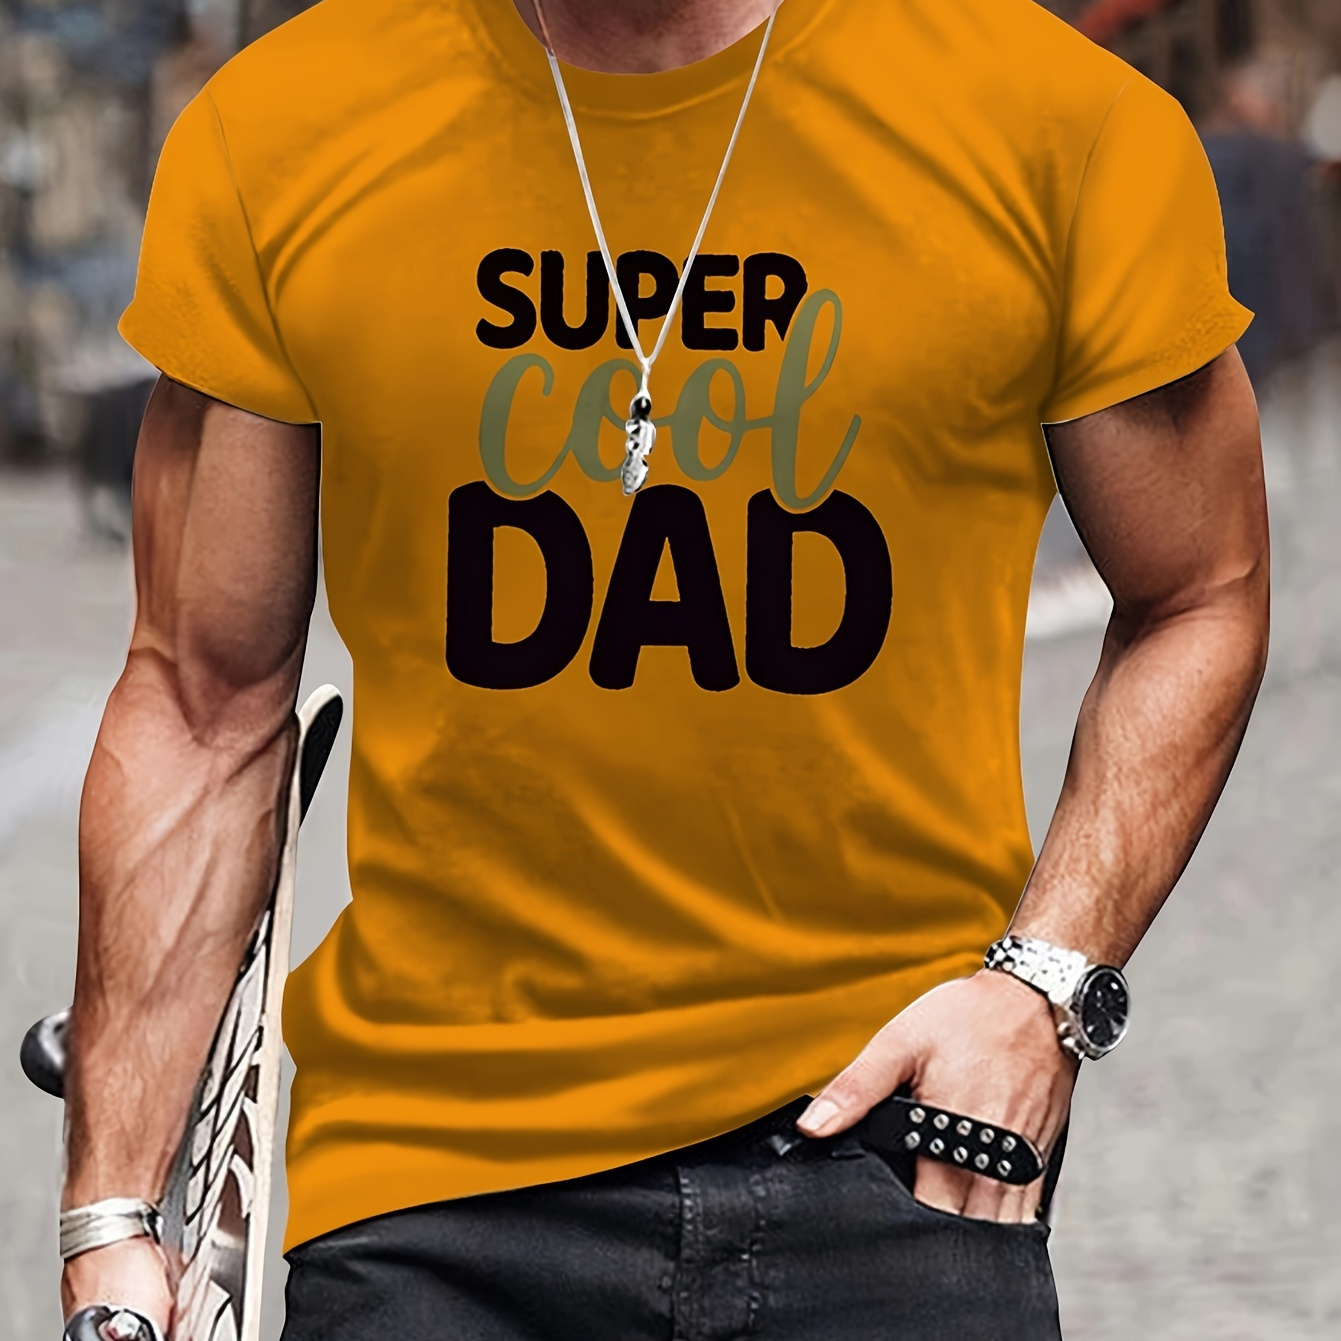 

Super Cool Dad Alphabet Print Crew Neck Short Sleeve T-shirt For Men, Casual Summer T-shirt For Daily Wear And Vacation Resorts